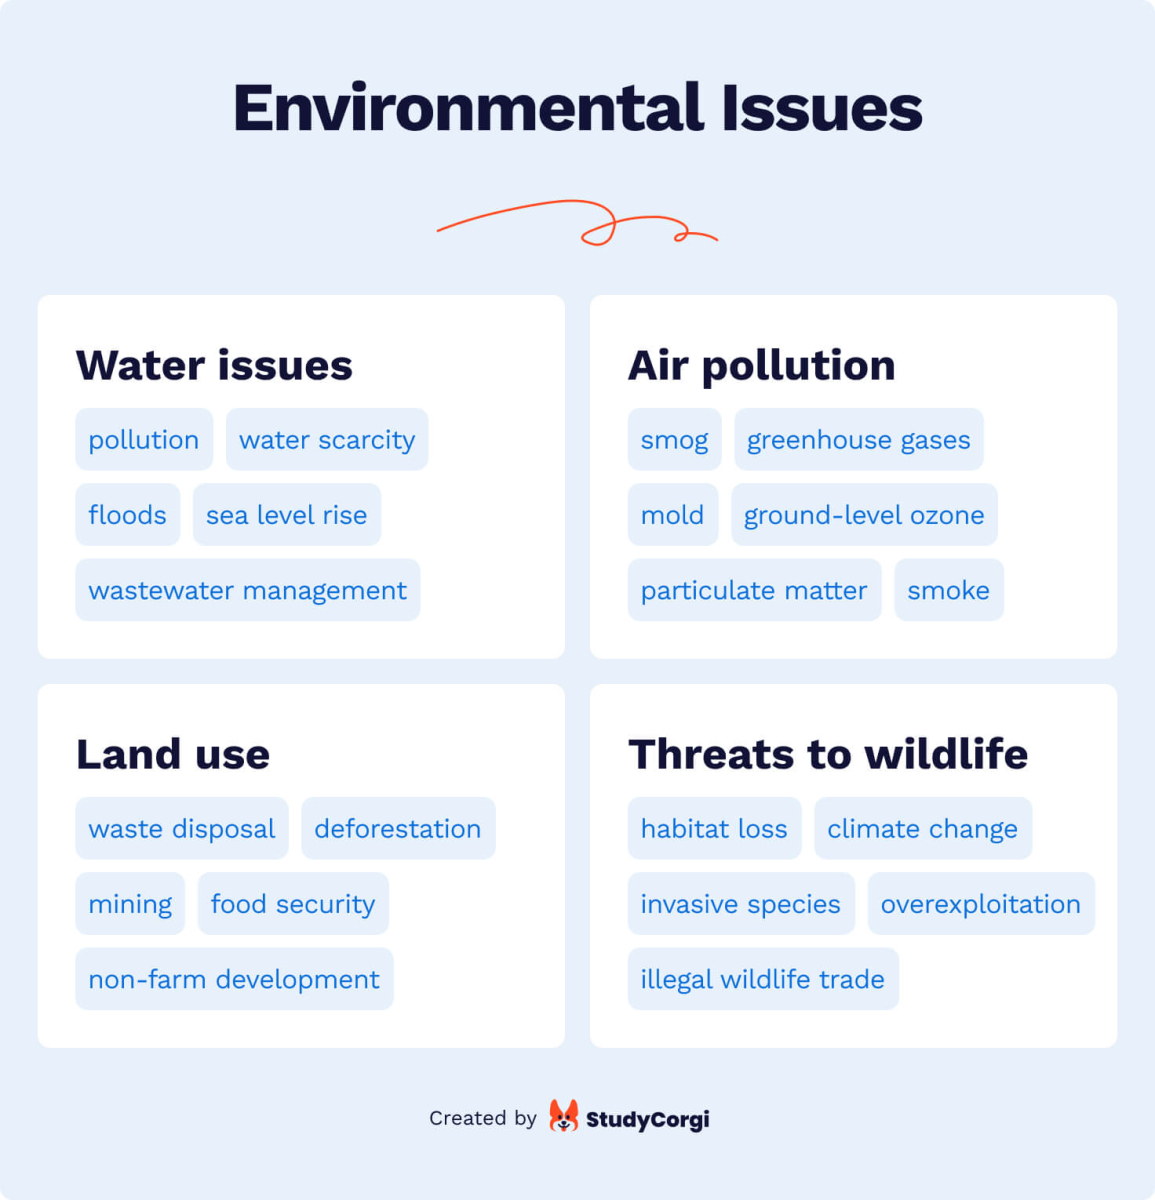 This image shows environmental issues to argue about.